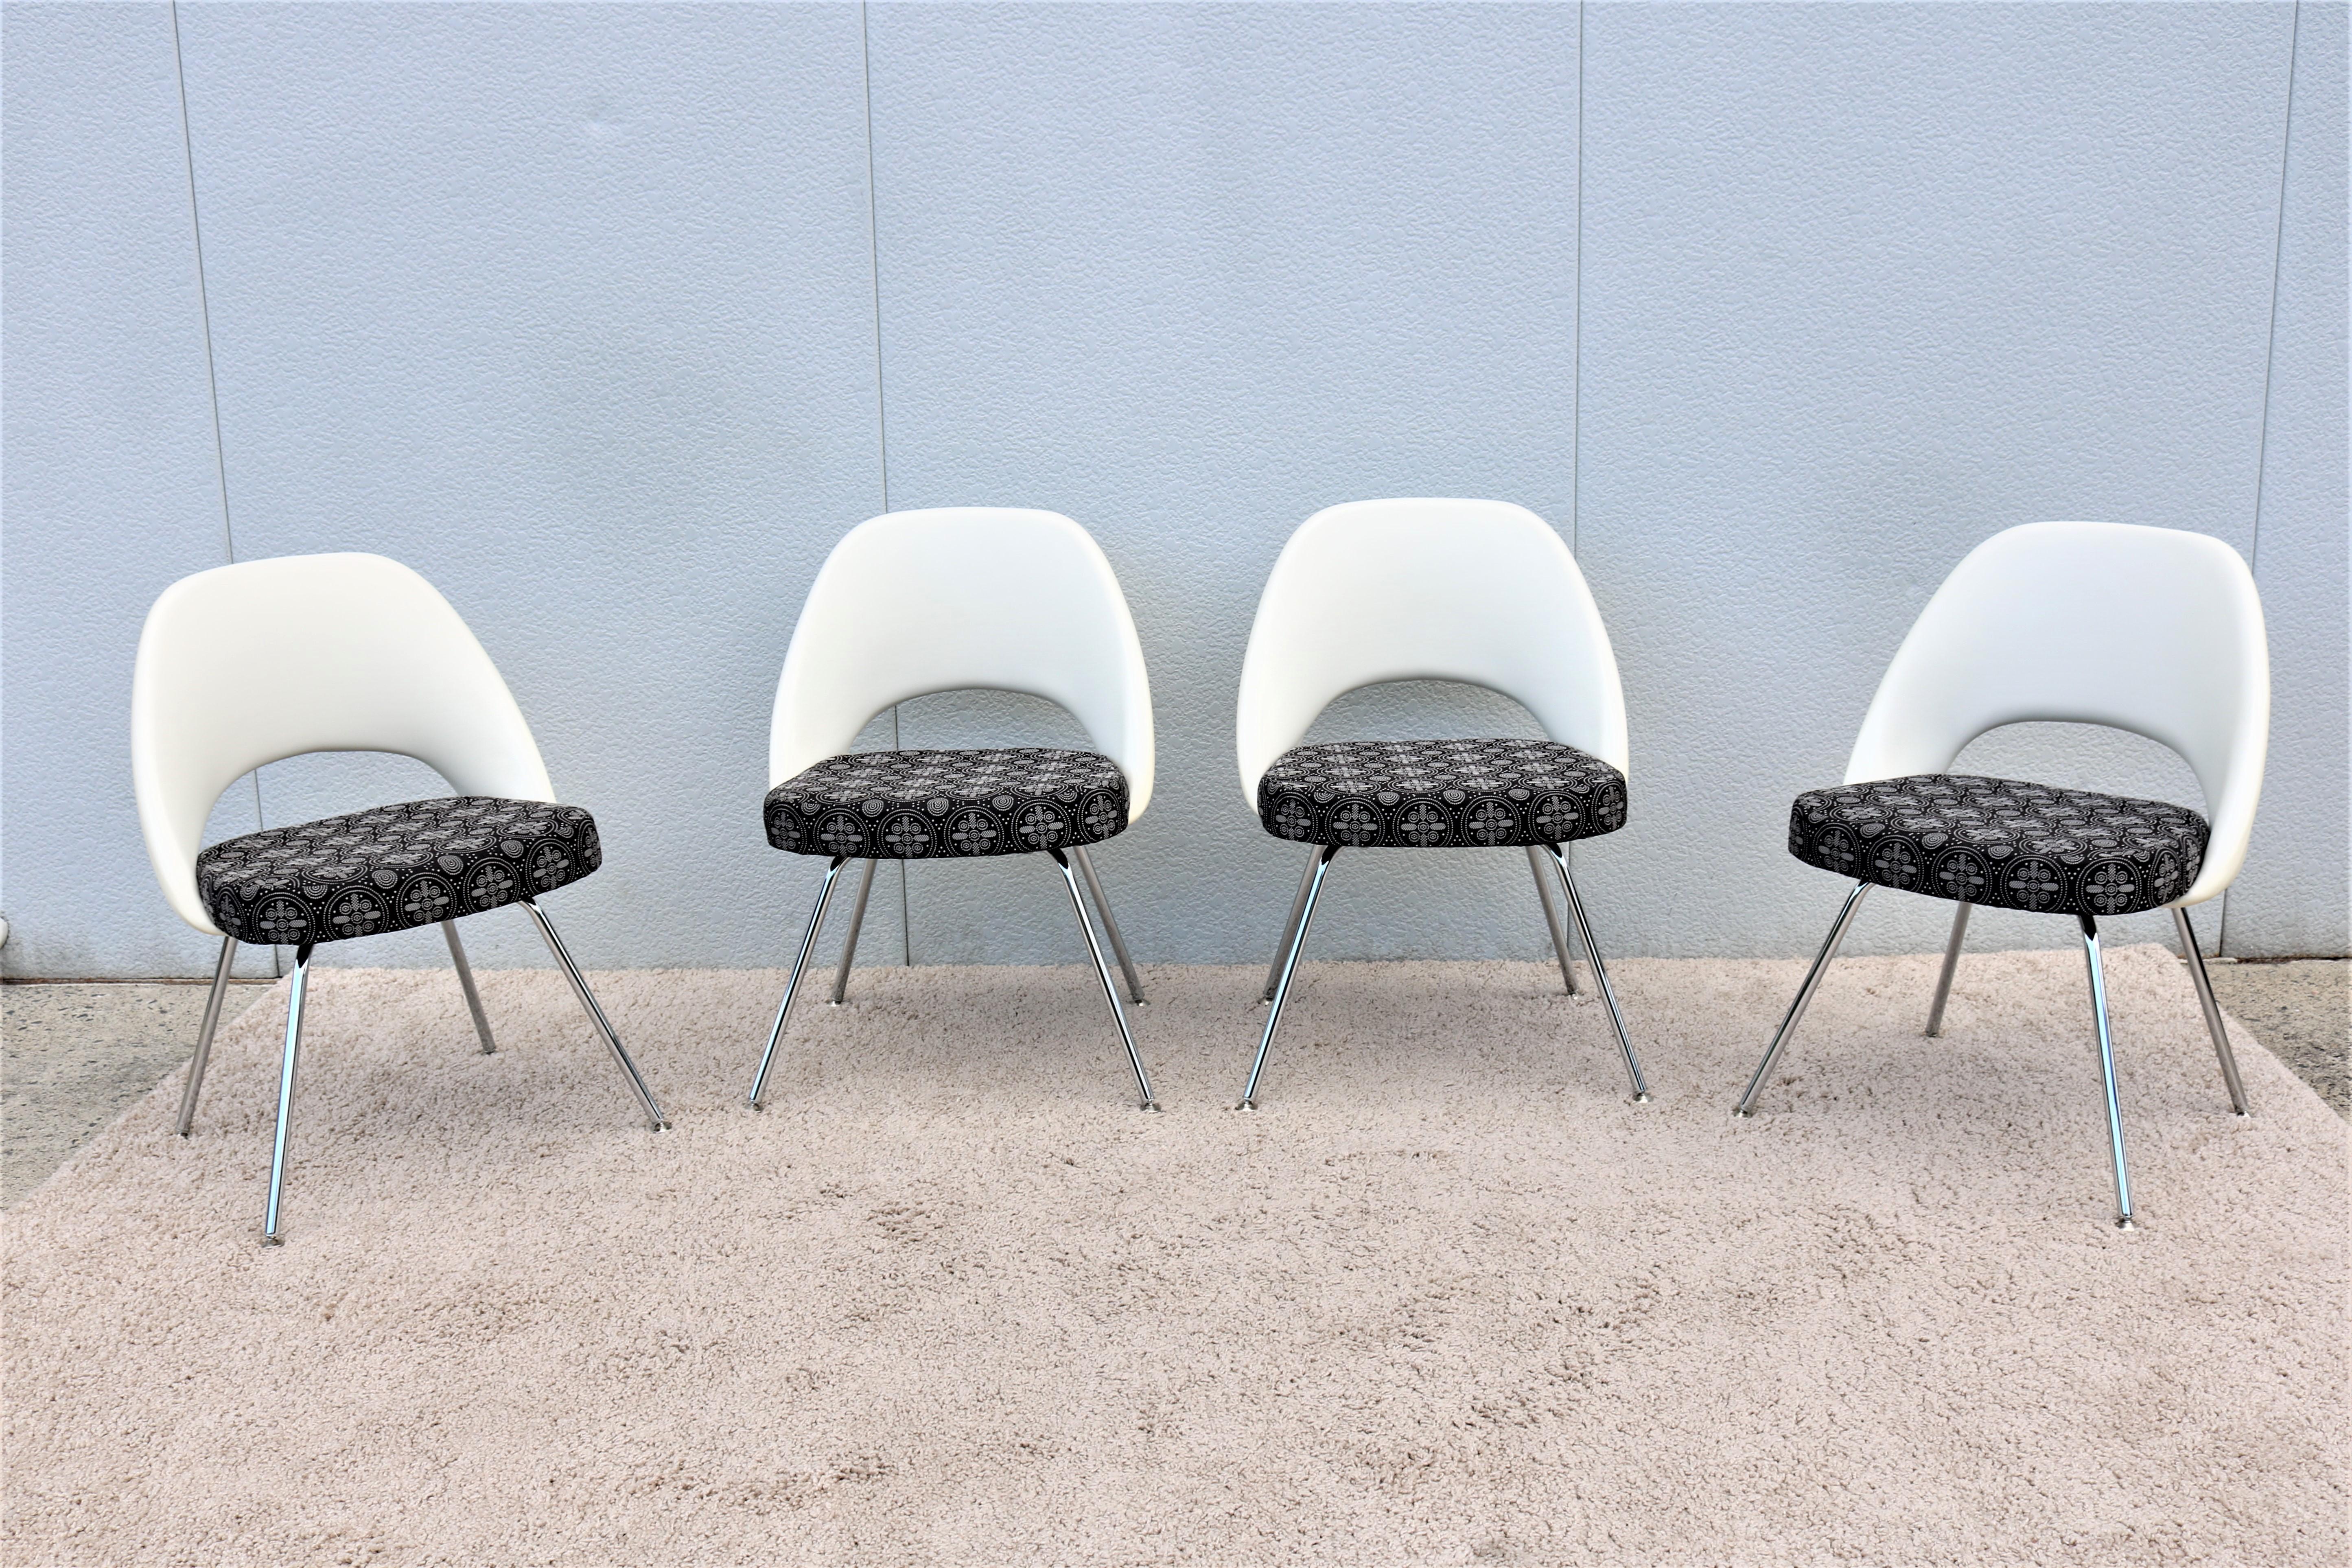 Stunning authentic Mid-Century Modern set of four Saarinen executive armless chairs by Knoll.
One of Knoll most popular designs that achieved comfort through the shape of its shell.
Was introduced in 1950 A midcentury modern Classic.

Please note